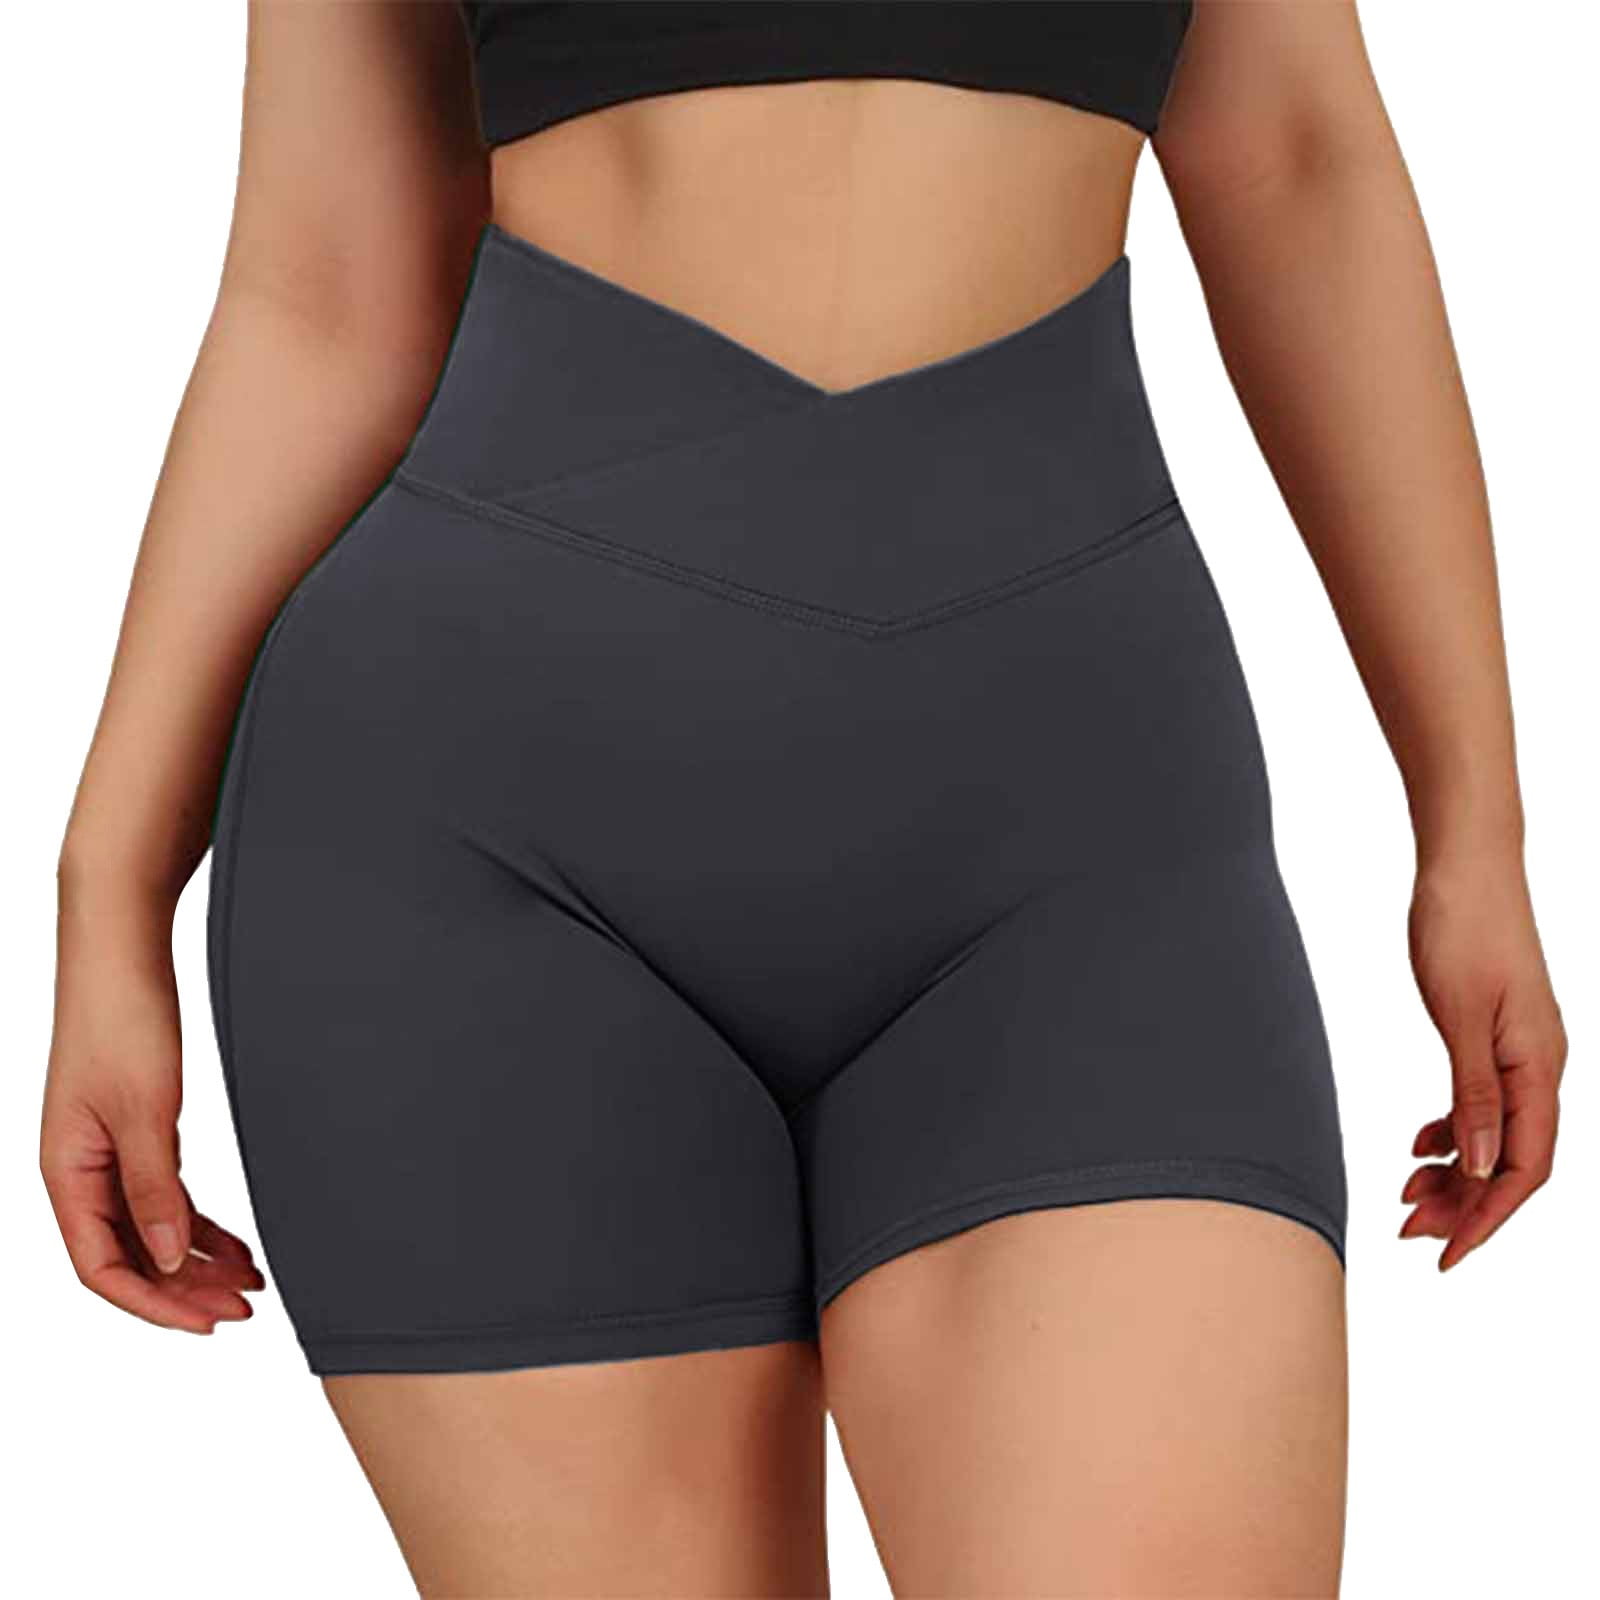 Spandex Shorts for Women High Waisted Yoga Booty Shorts Workout Biker  Exercise Lounge Wear Home Cheerleader Dance Volleyball Outfits Safety Shorts  for Under Dresses Skirt 2.5 3 Inch Pants Black 2 Pack